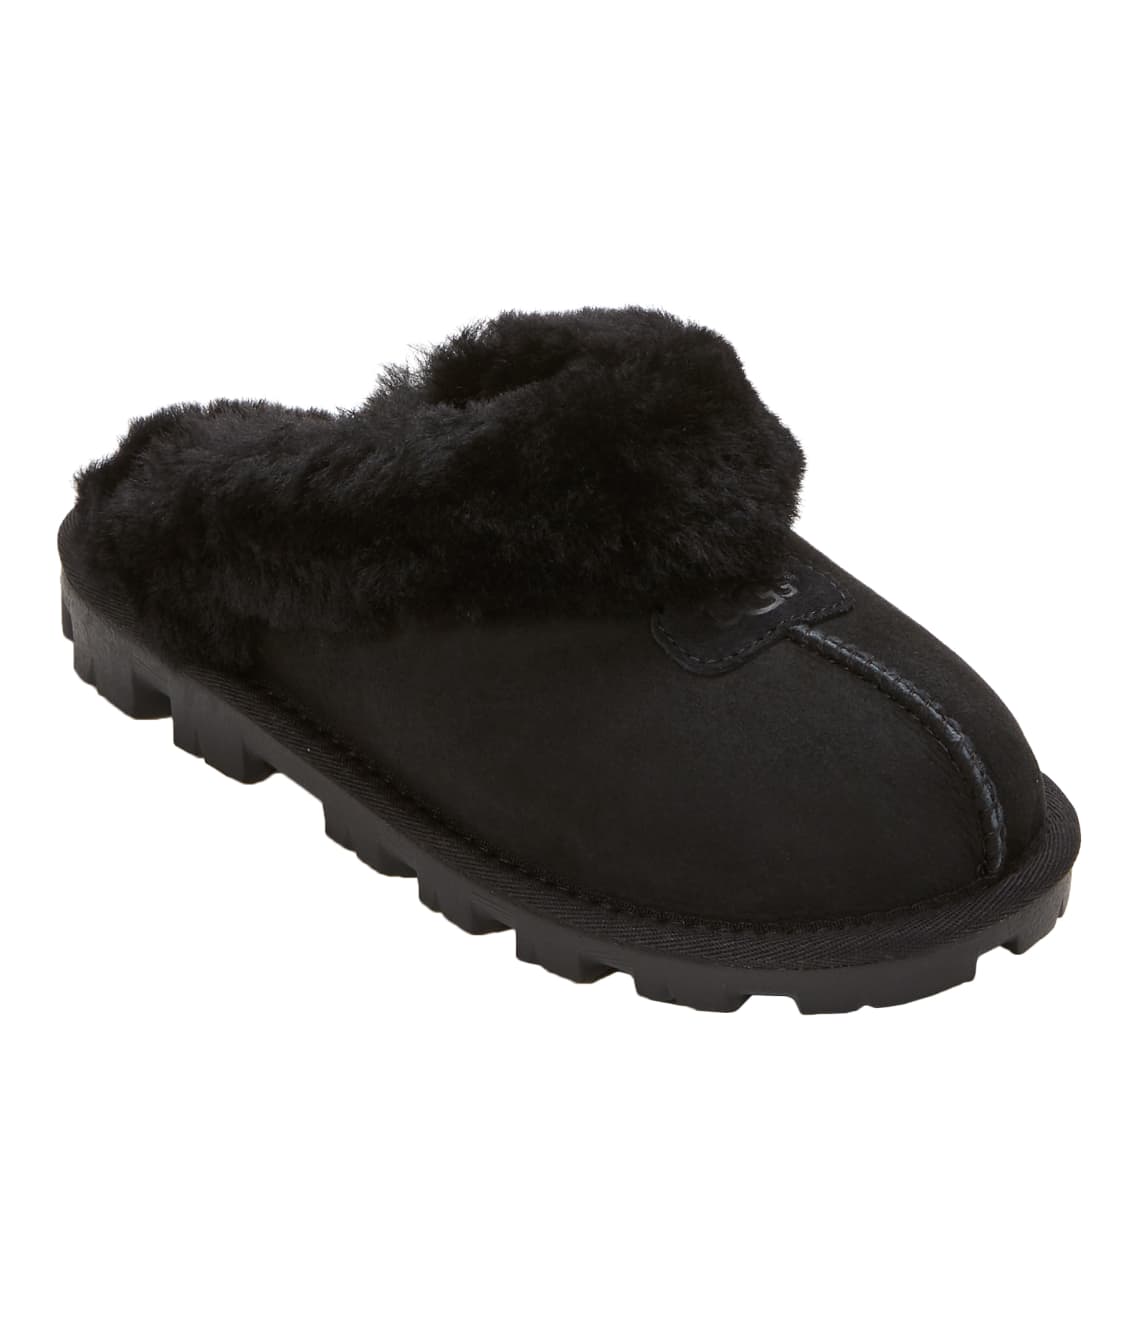 UGG: Coquette Slippers 5125